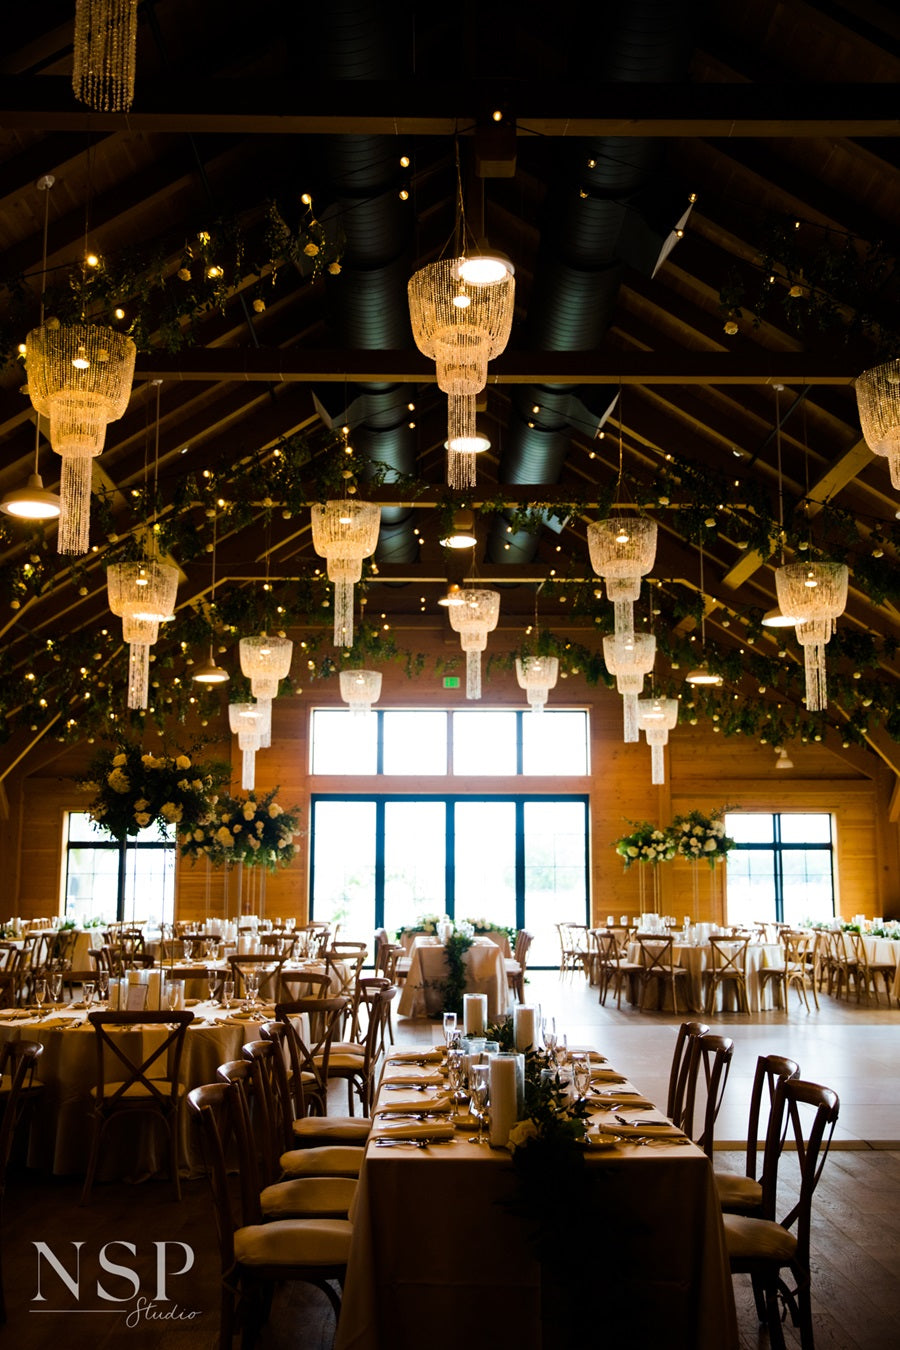 Room shot of the reception. Chandeliers hang from the ceiling with greenery and string lights wrapped around the rafters. Tables are set with greenery, florals, candles, and tableware.